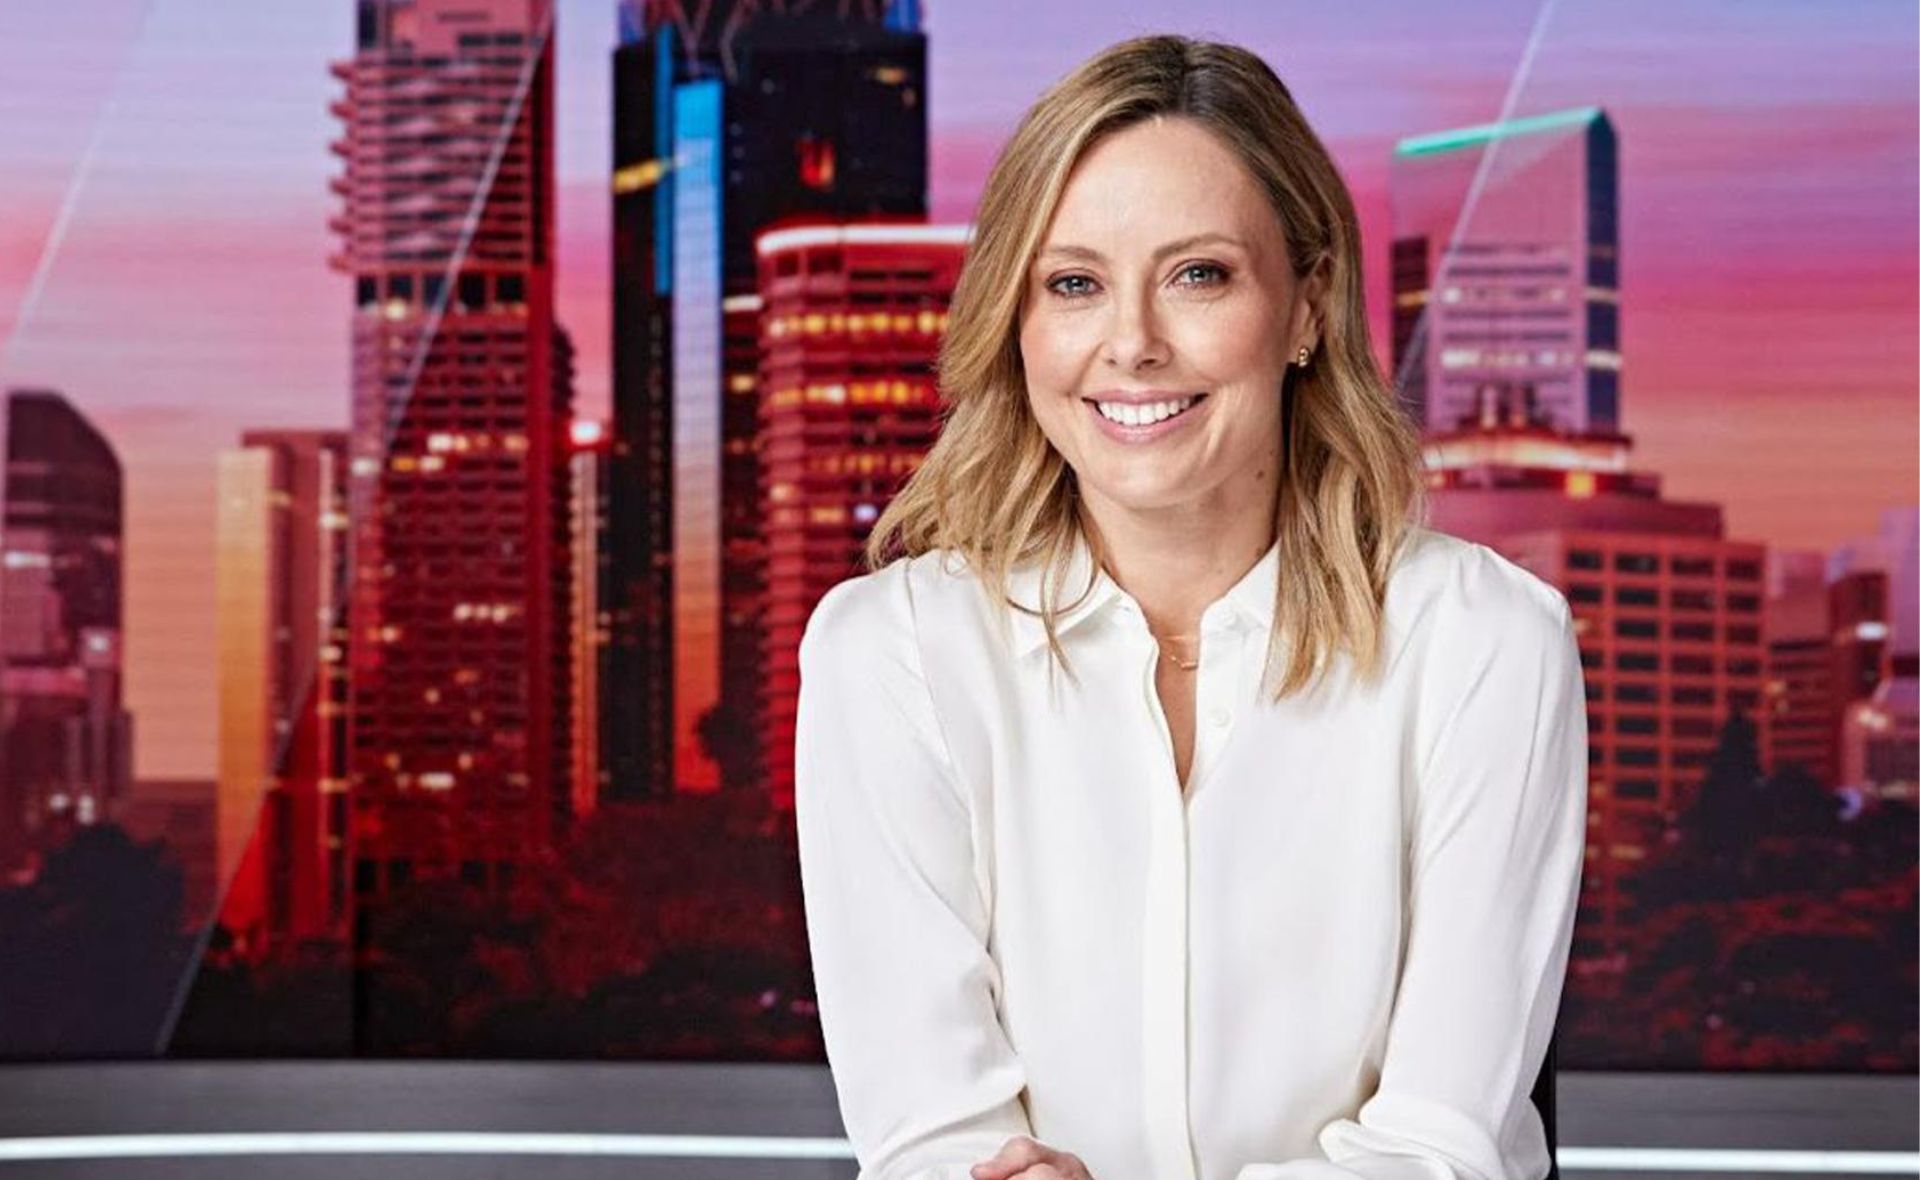 A Current Affair ratings reach record highs as viewers adore Allison Langdon